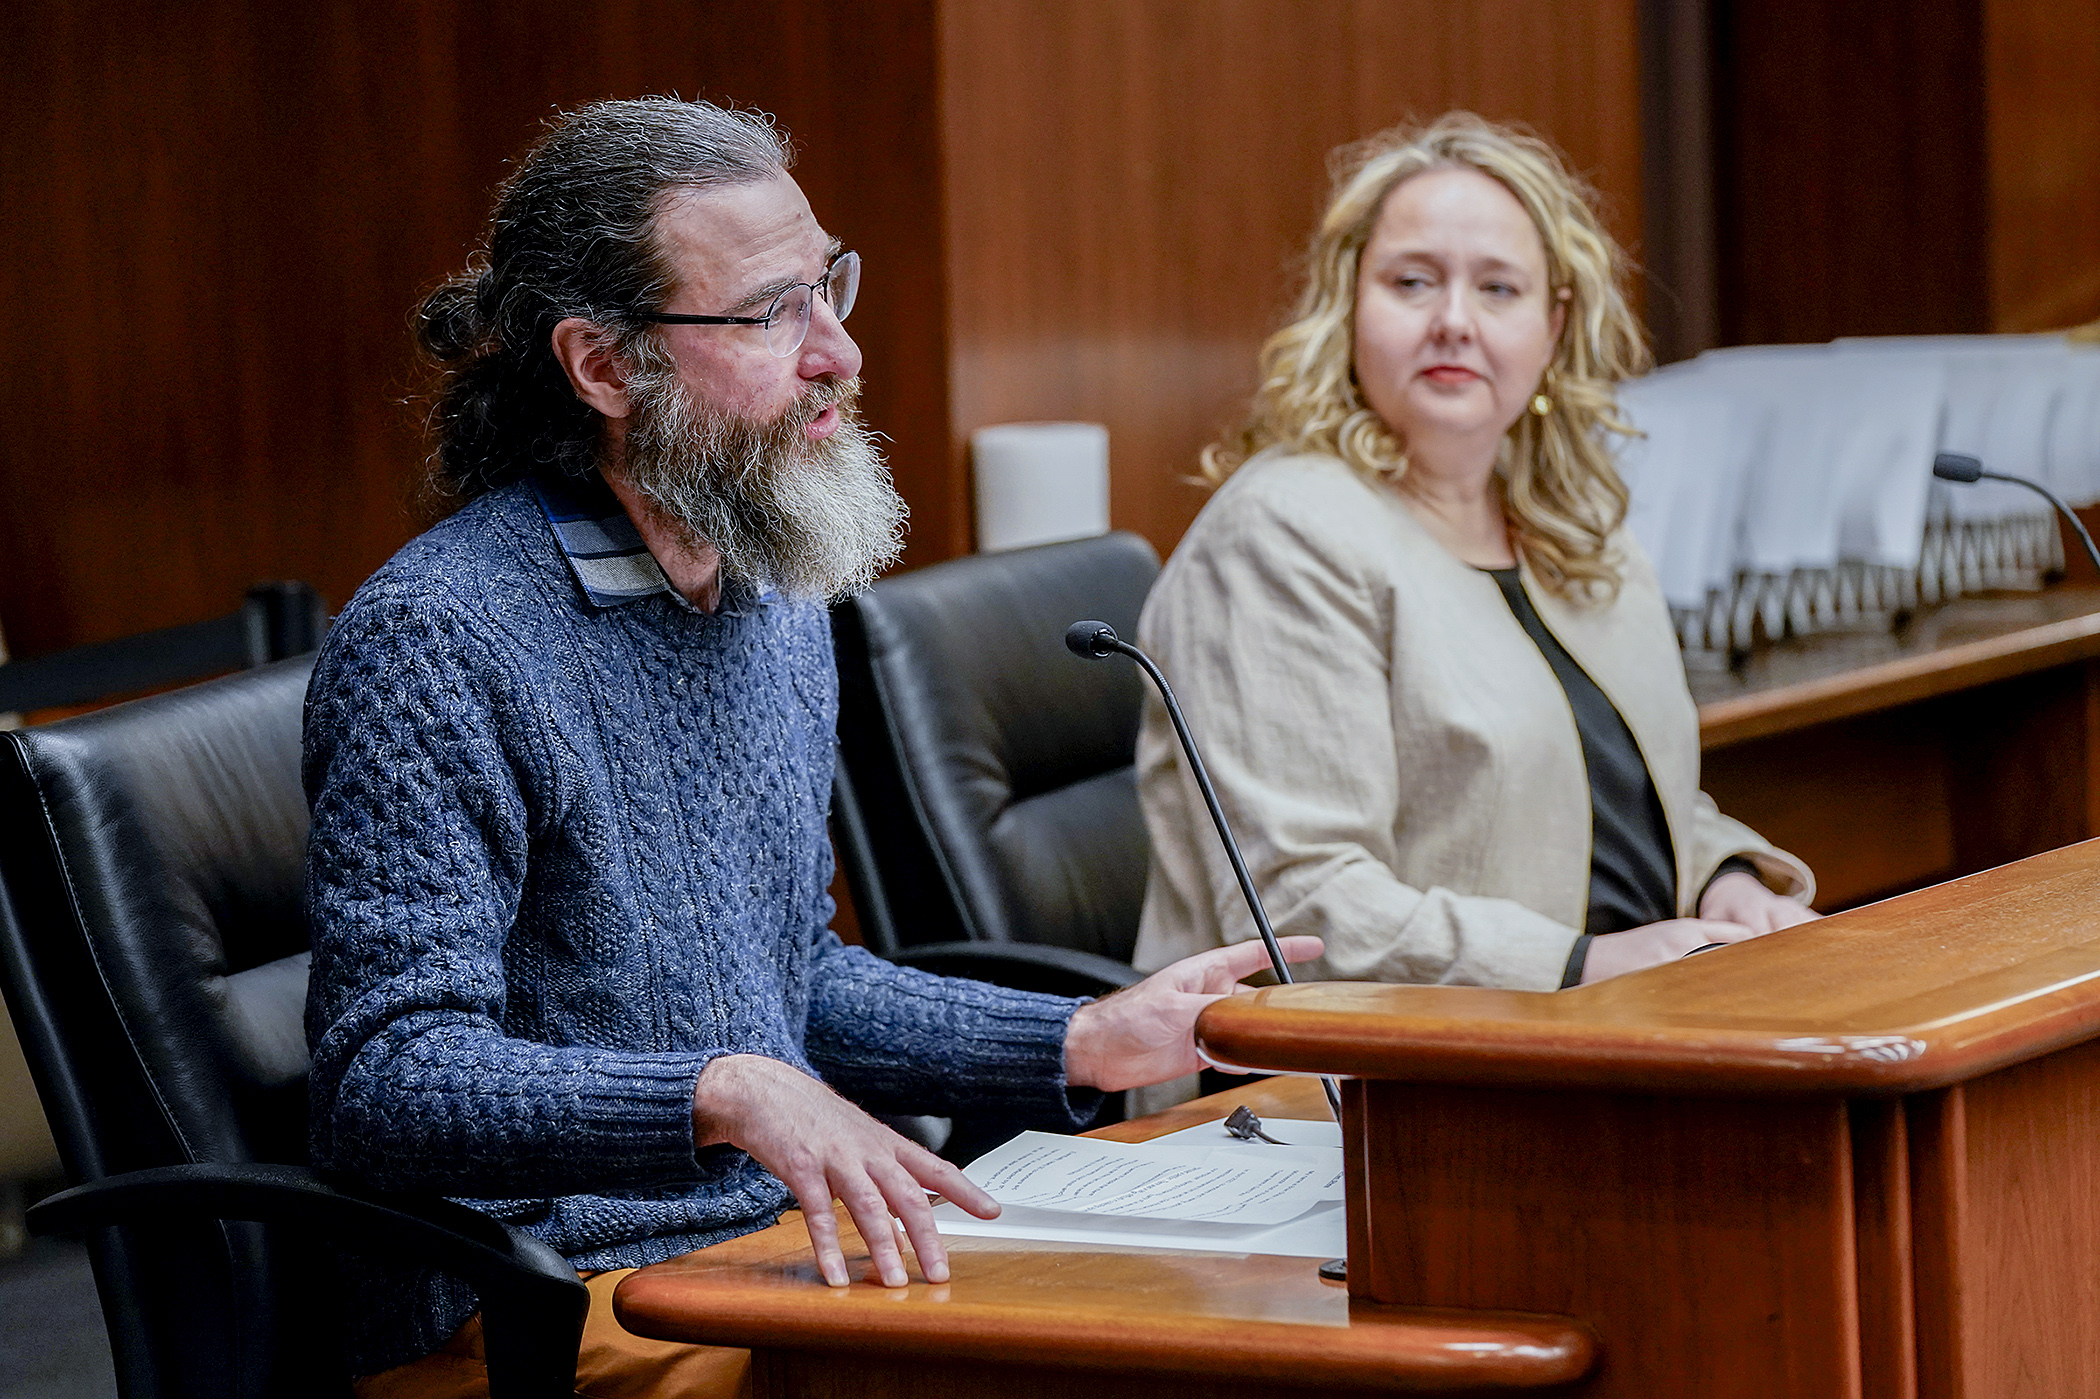 Brian Shea, a former residential property management employee, testifies March 5 before the House judiciary committee in support of a Rep. Emma Greenman's bill to prohibit restrictive employment covenants in service contracts. (Photo by Michele Jokinen)